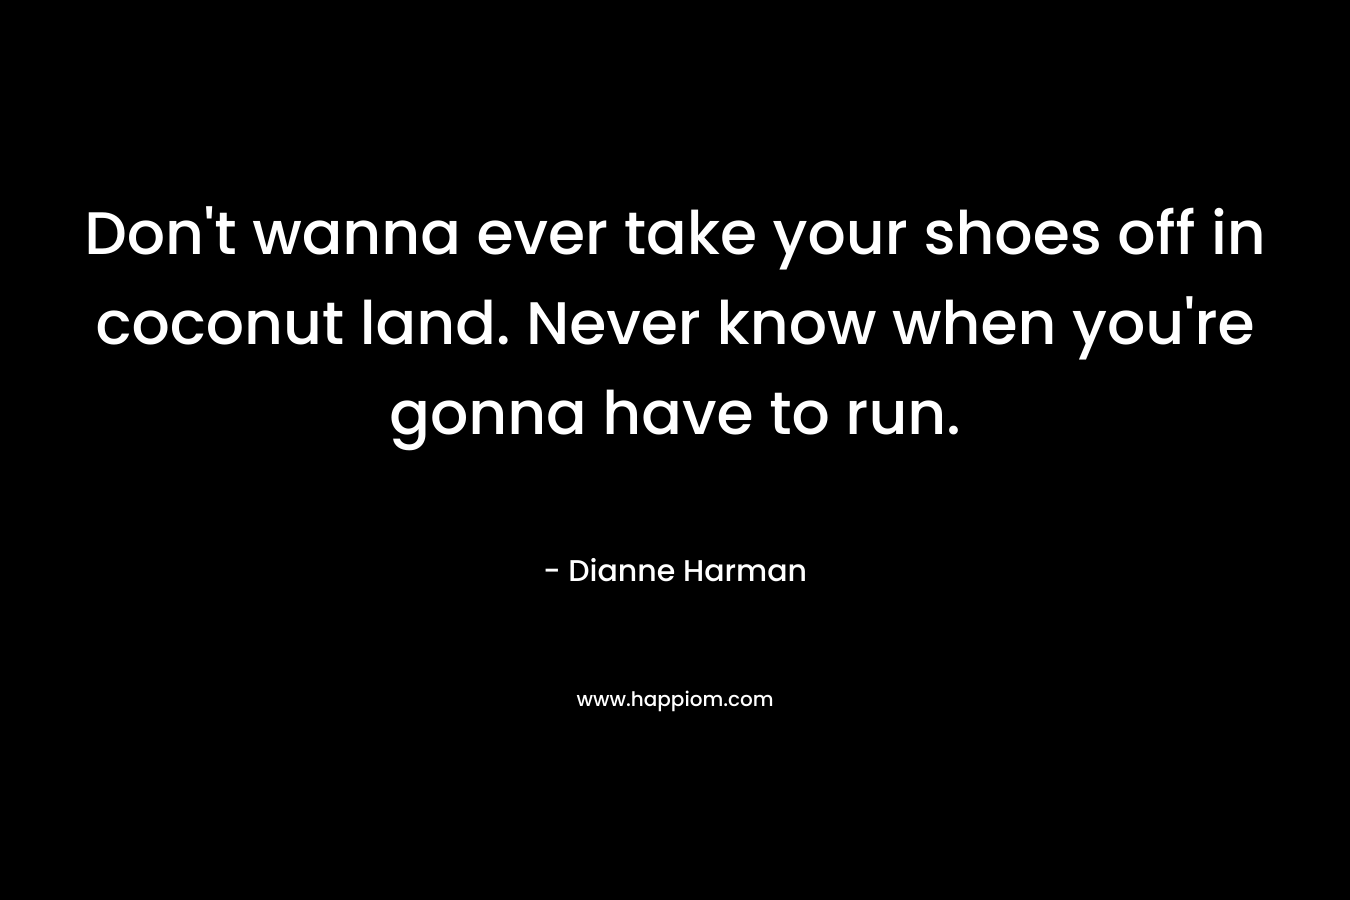 Don’t wanna ever take your shoes off in coconut land. Never know when you’re gonna have to run. – Dianne Harman